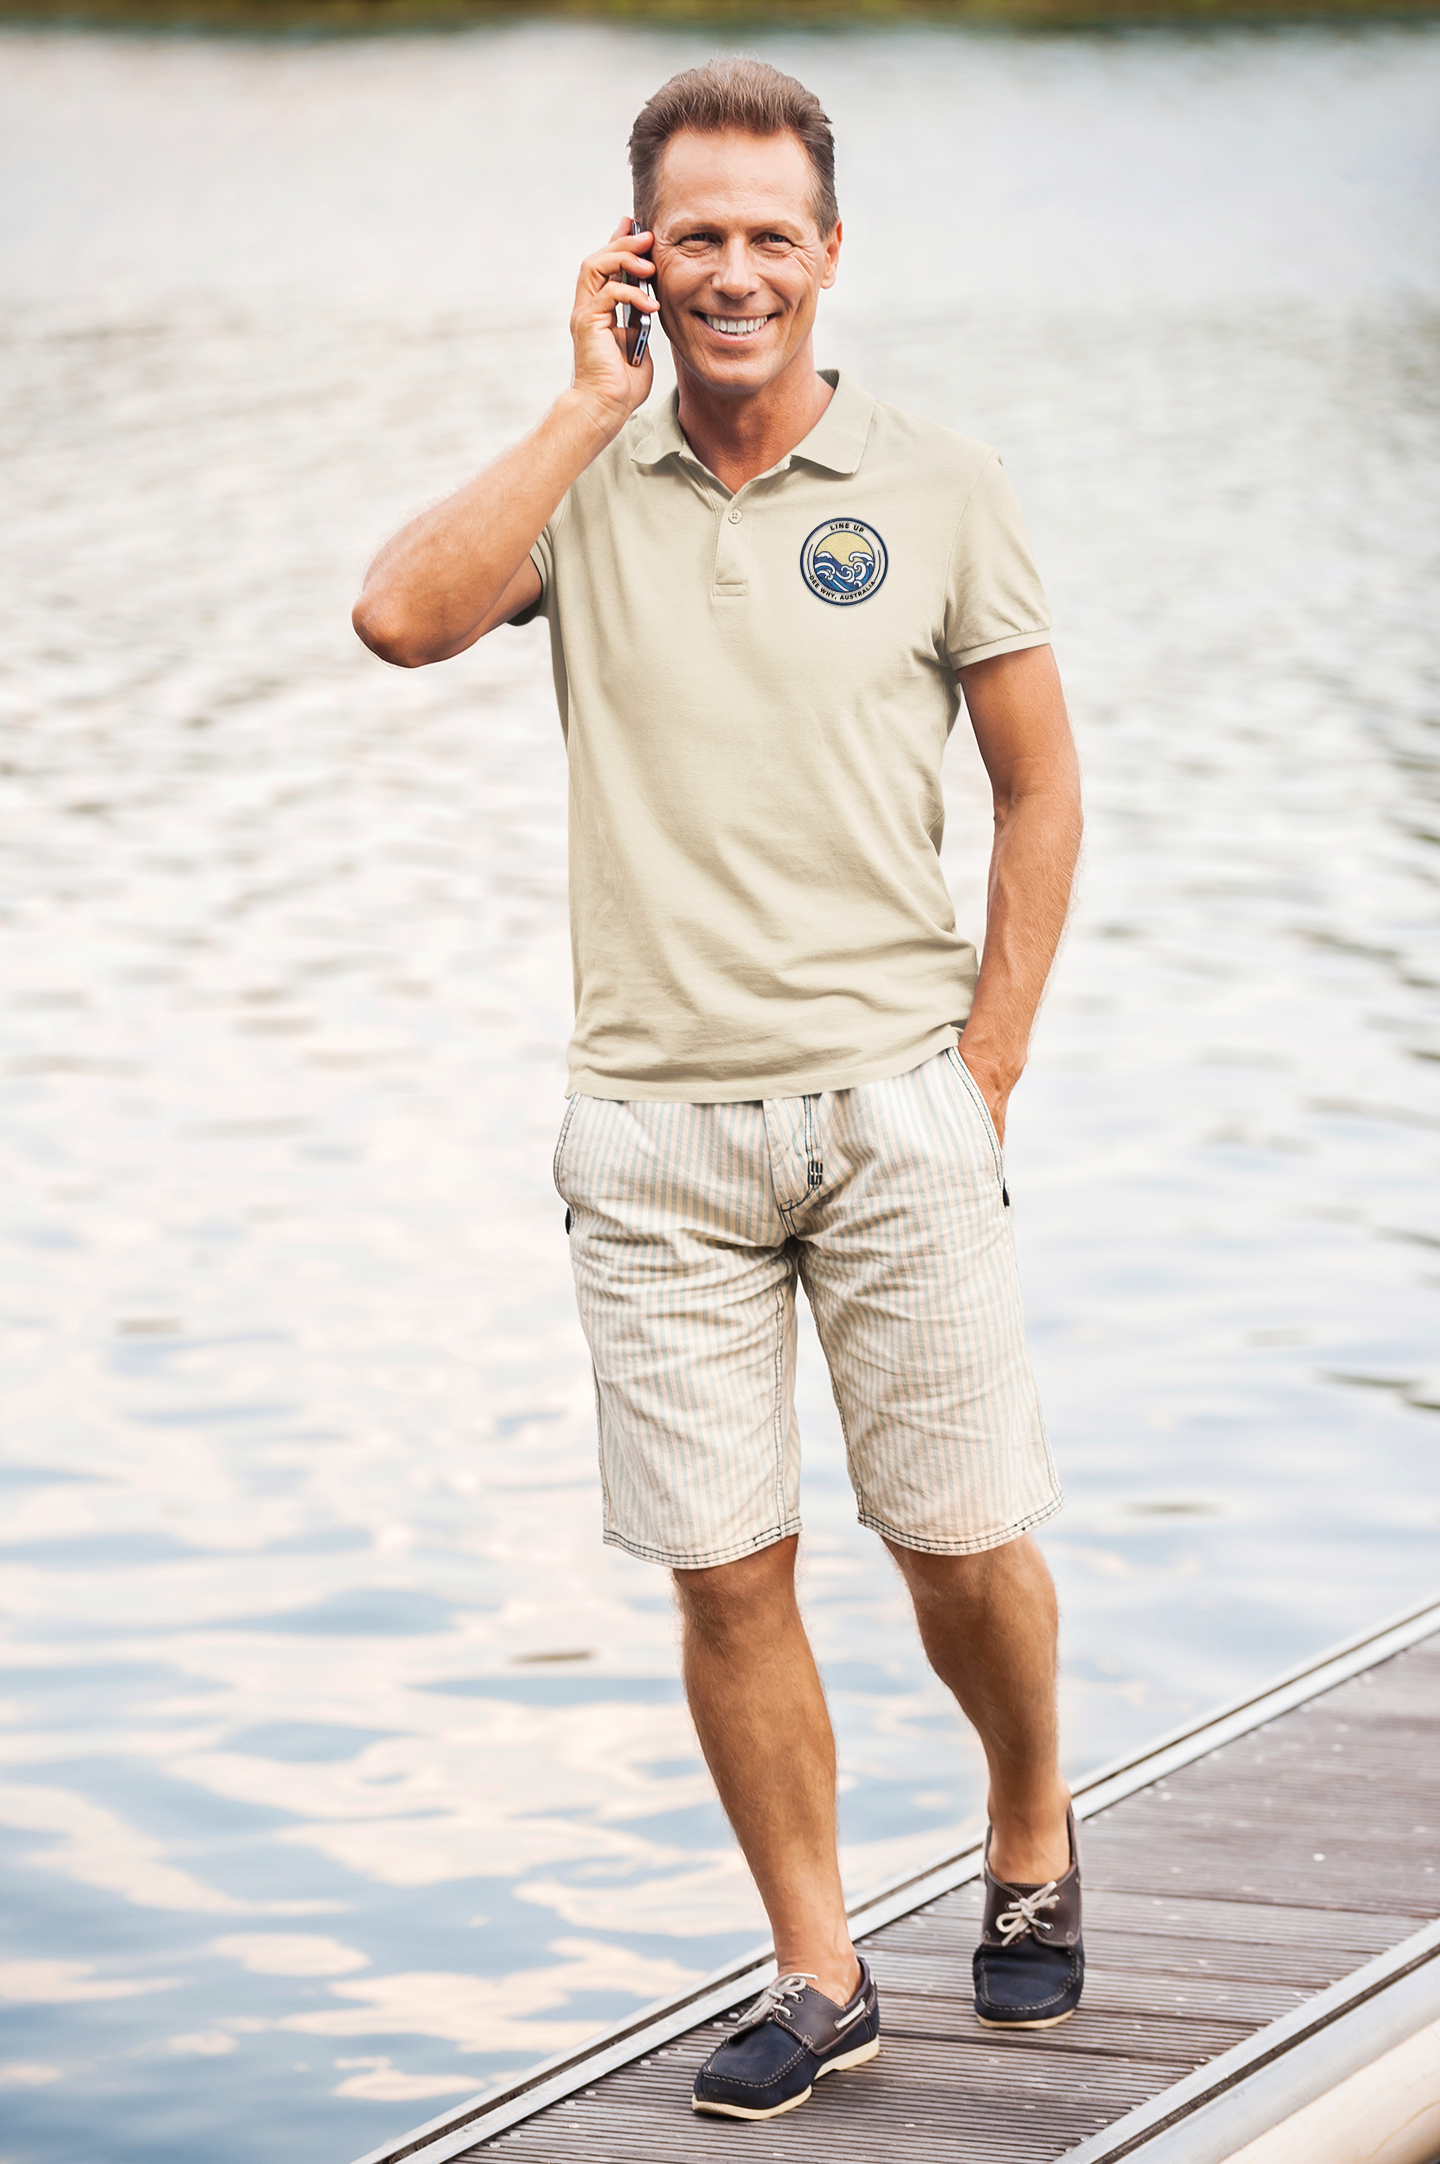 Cotton Polo Shirts Northern Beaches logo Navy and Sandstone